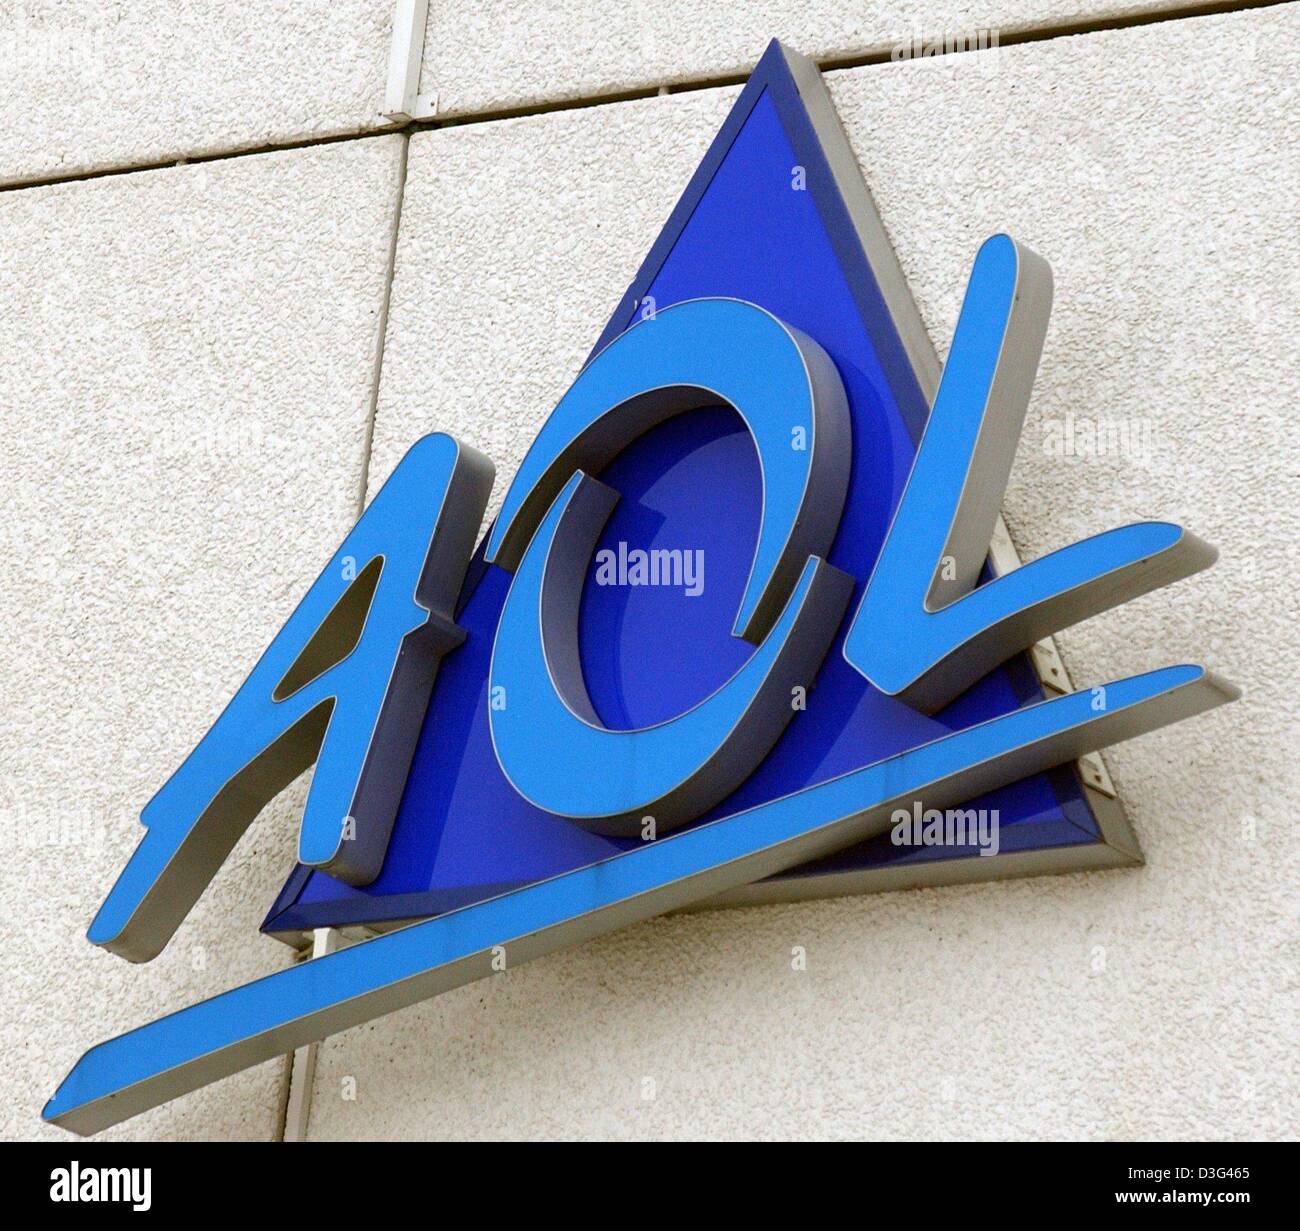 (dpa) - The logo of America Online (AOL), one of the world's largest Internet providers, is photographed on a building in Munich, Germany, 10 February 2003.  According to an AOL spokesperson, the company plans to cut 170 jobs in Germany in 2003. Stock Photo